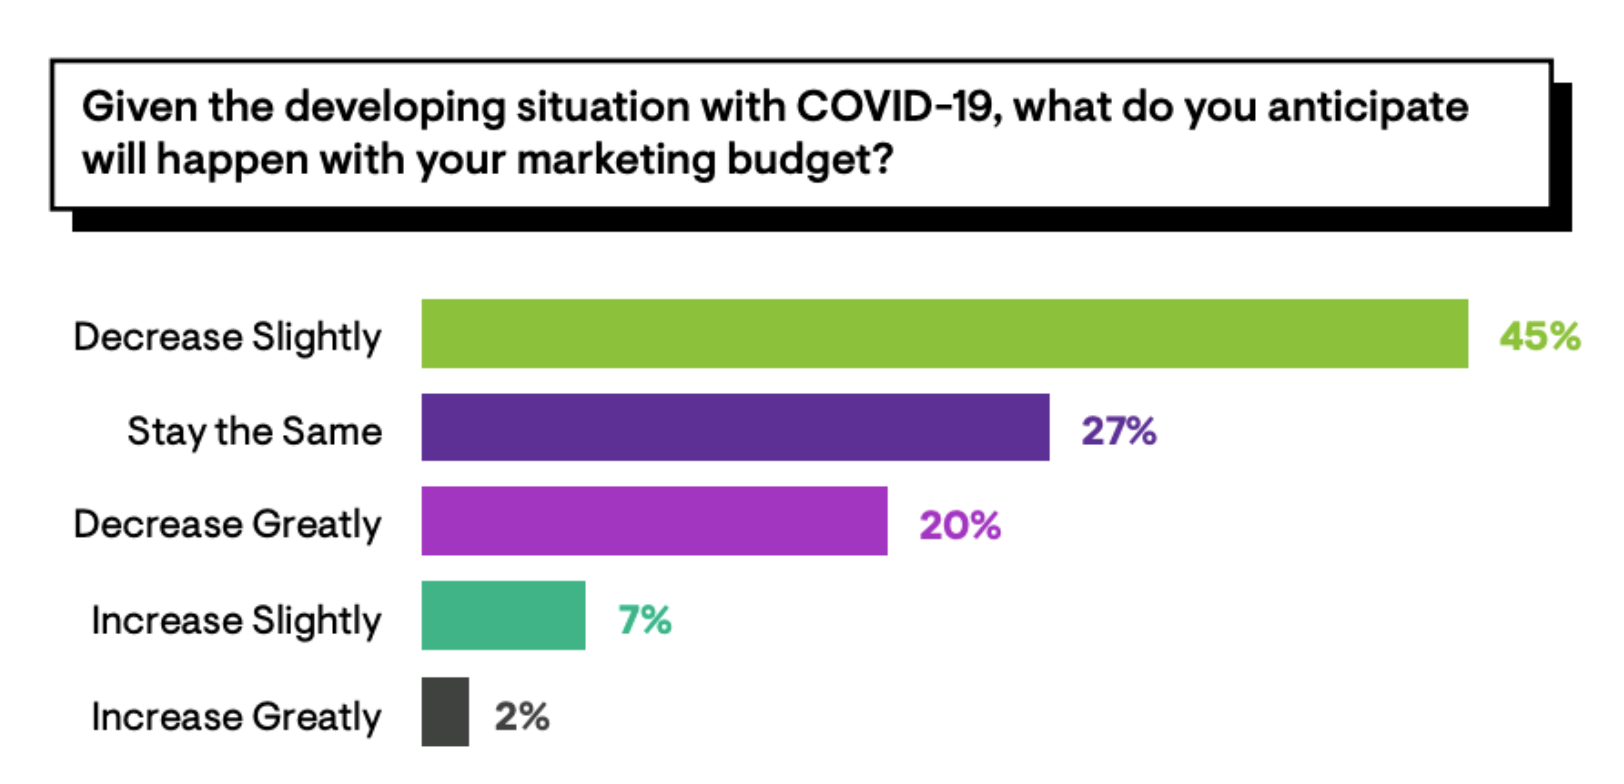 Graph describing anticpated changes in marketing budgets due to the COVID-19 situation